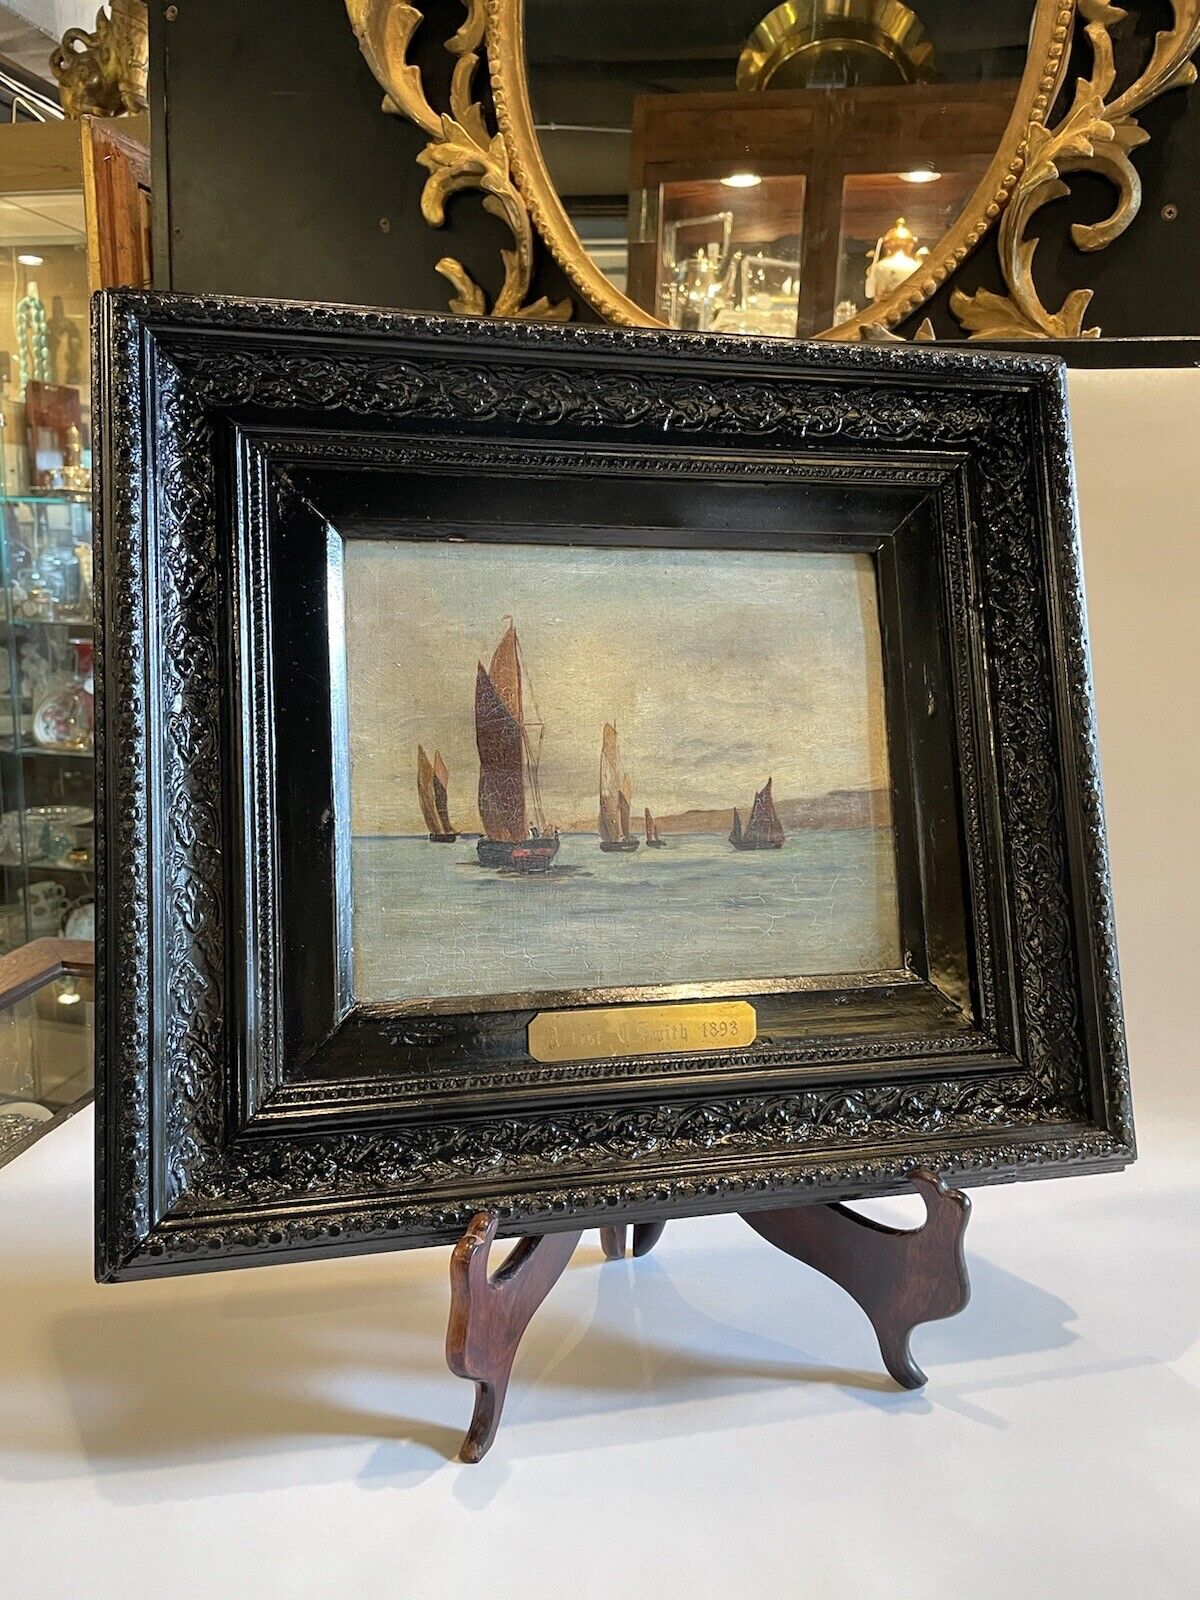 1893 Victorian English Oil on Canvas Framed Maritime Painting Signed G. Smith